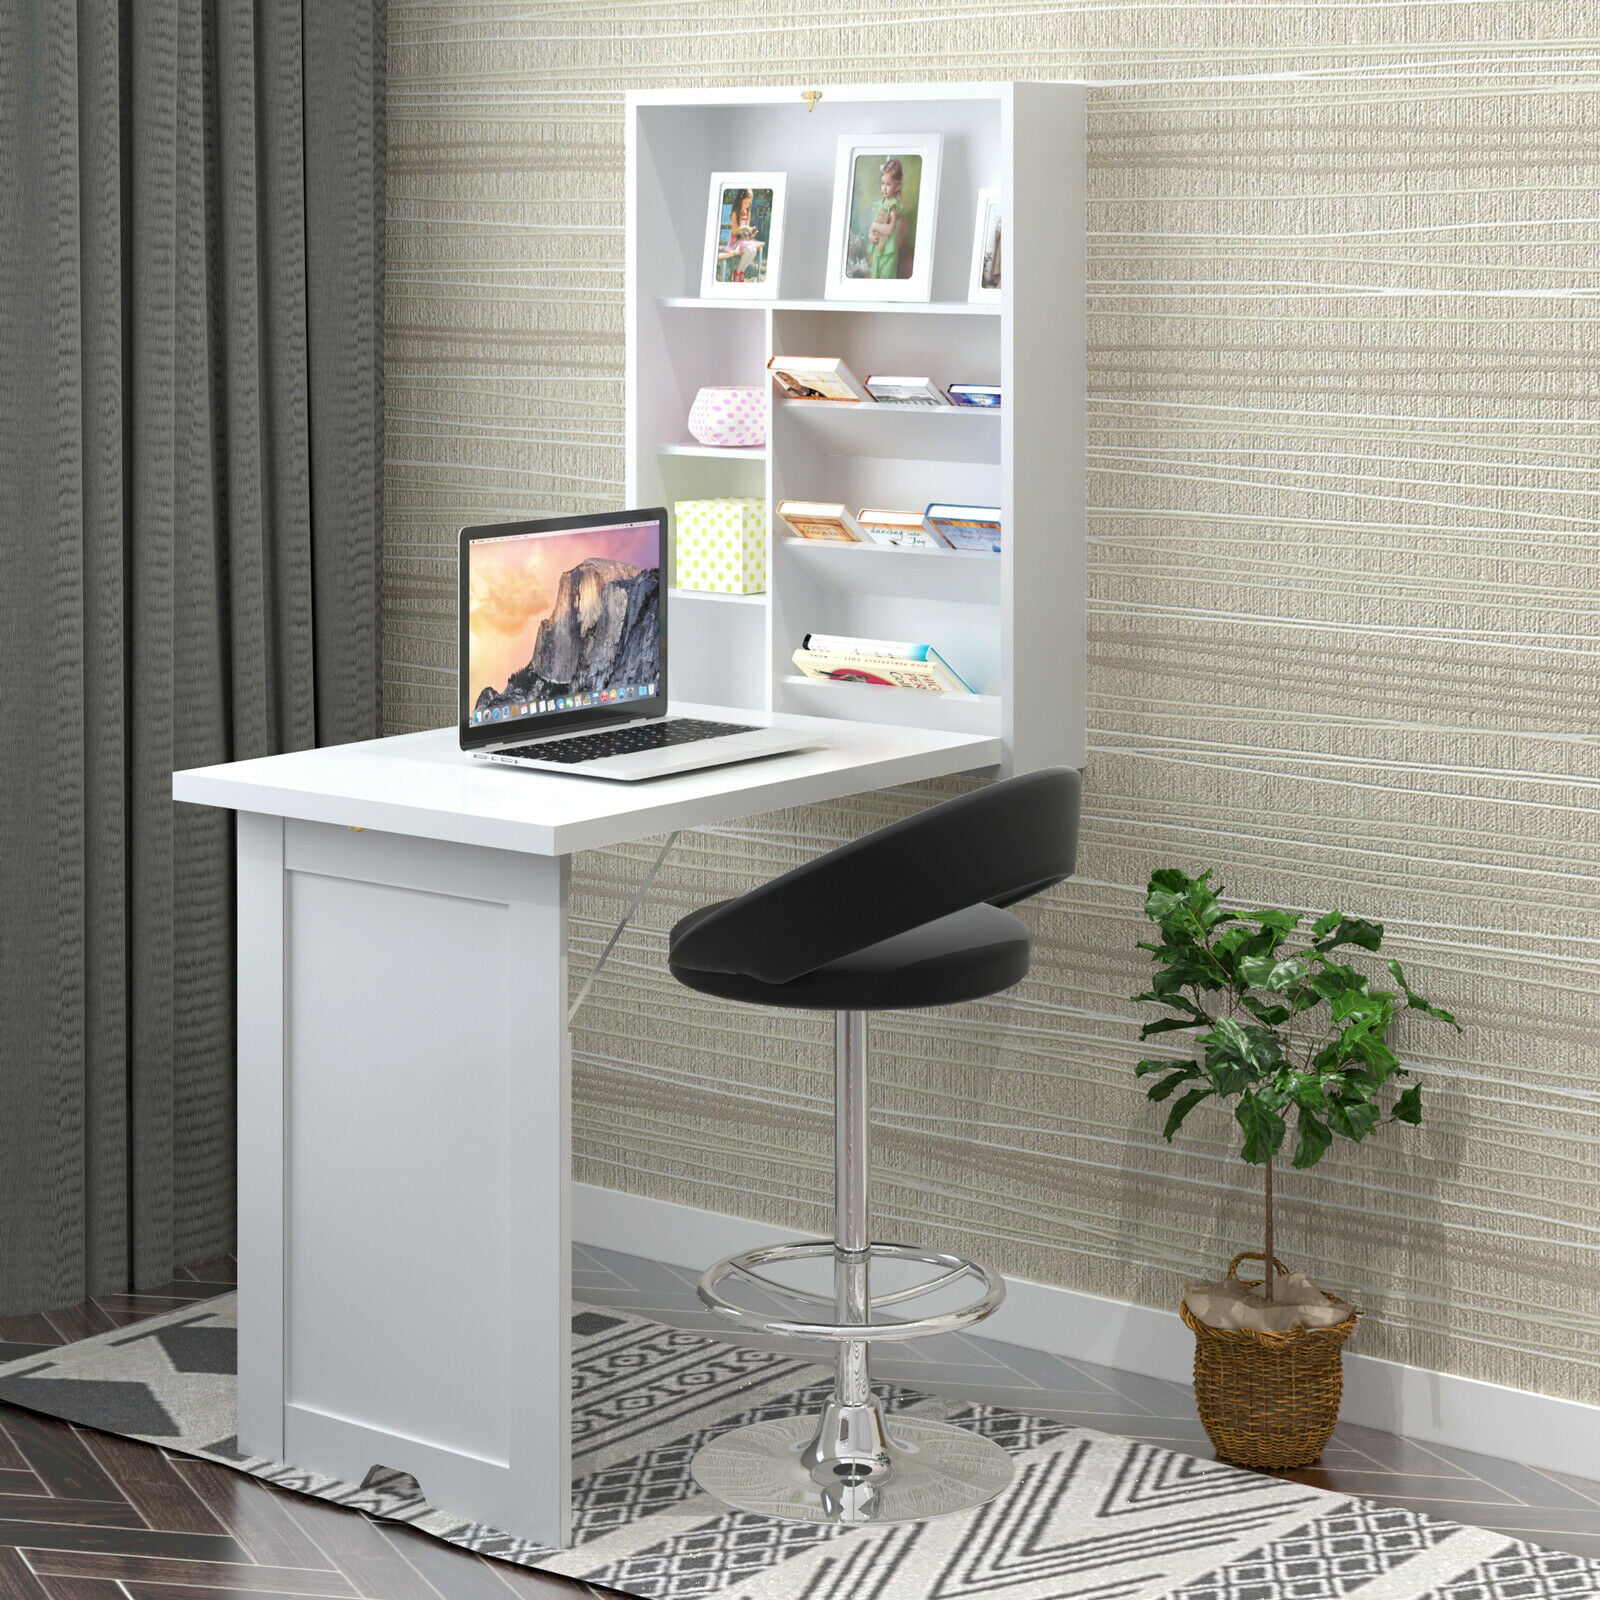 Details about   Wall-Mounted Drop-Leaf Table Folding Floating Desk White Laptop Space Saving PC 